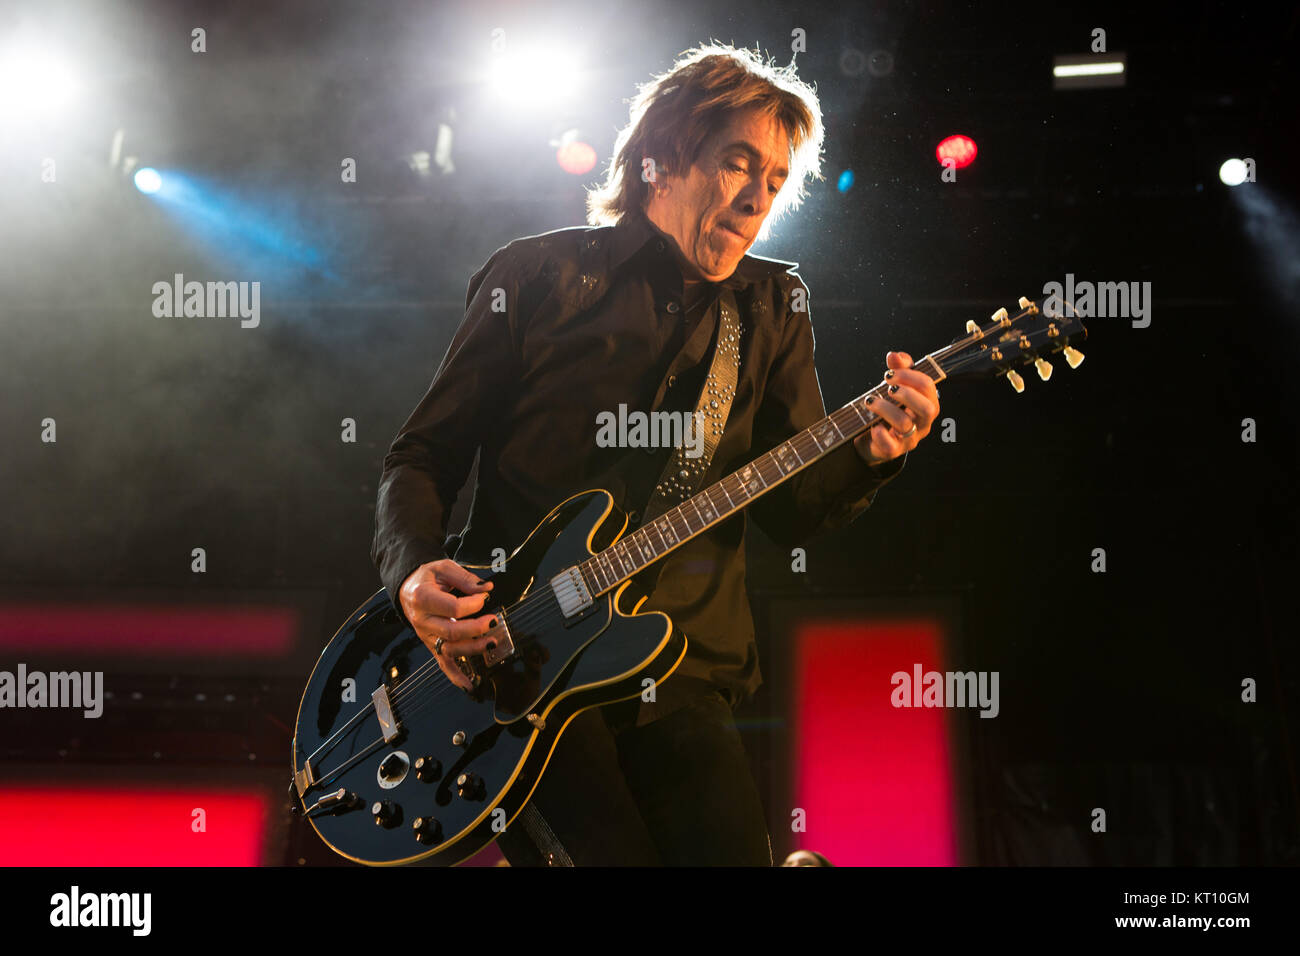 Norway, Fredrikstad – July 23, 2017. The Swedish singer, songwriter and musician Per Gessle performs a live concert during the Norwegian festival Månefestivalen 2017 in Fredrikstad. Per Gessle is formerly known from the Swedish pop duo Roxette. Stock Photo